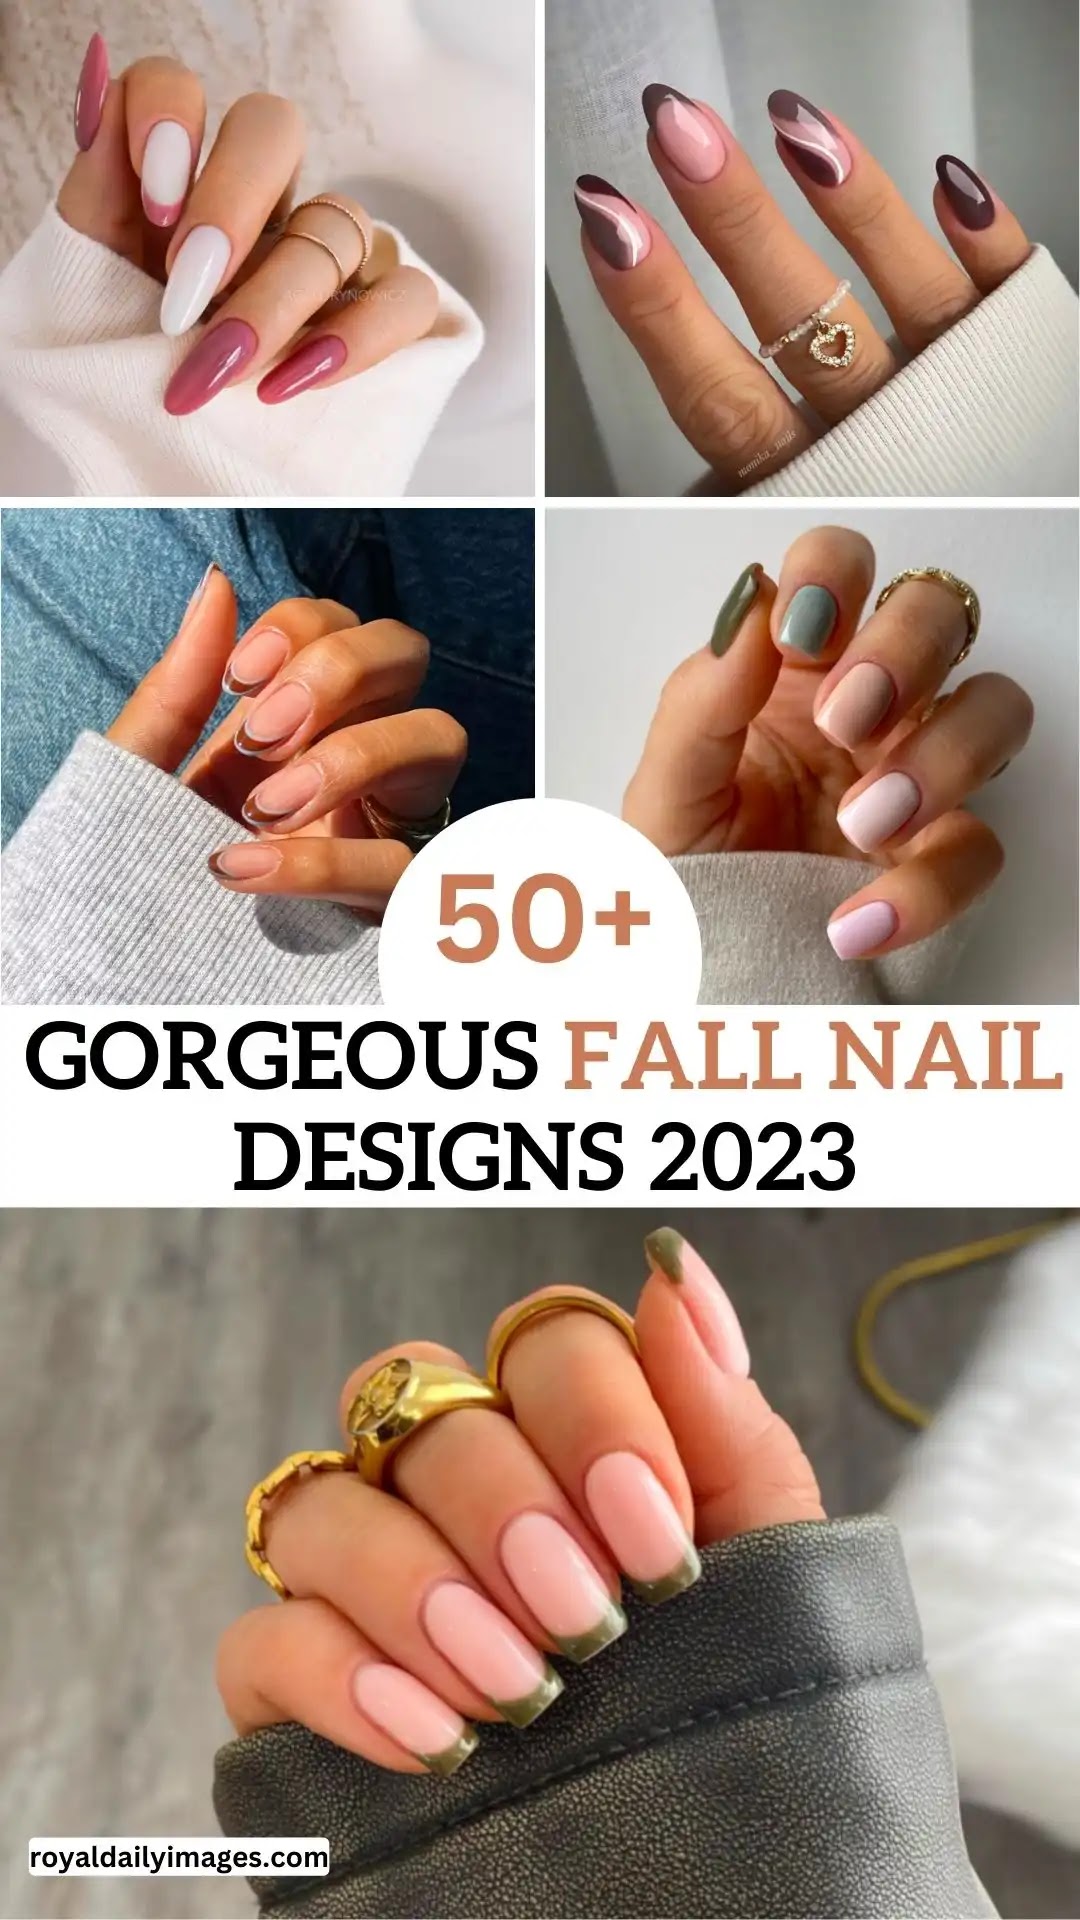 Top 50+ Adorable Fall Nail Designs 2023 for Trendy Autumn Style